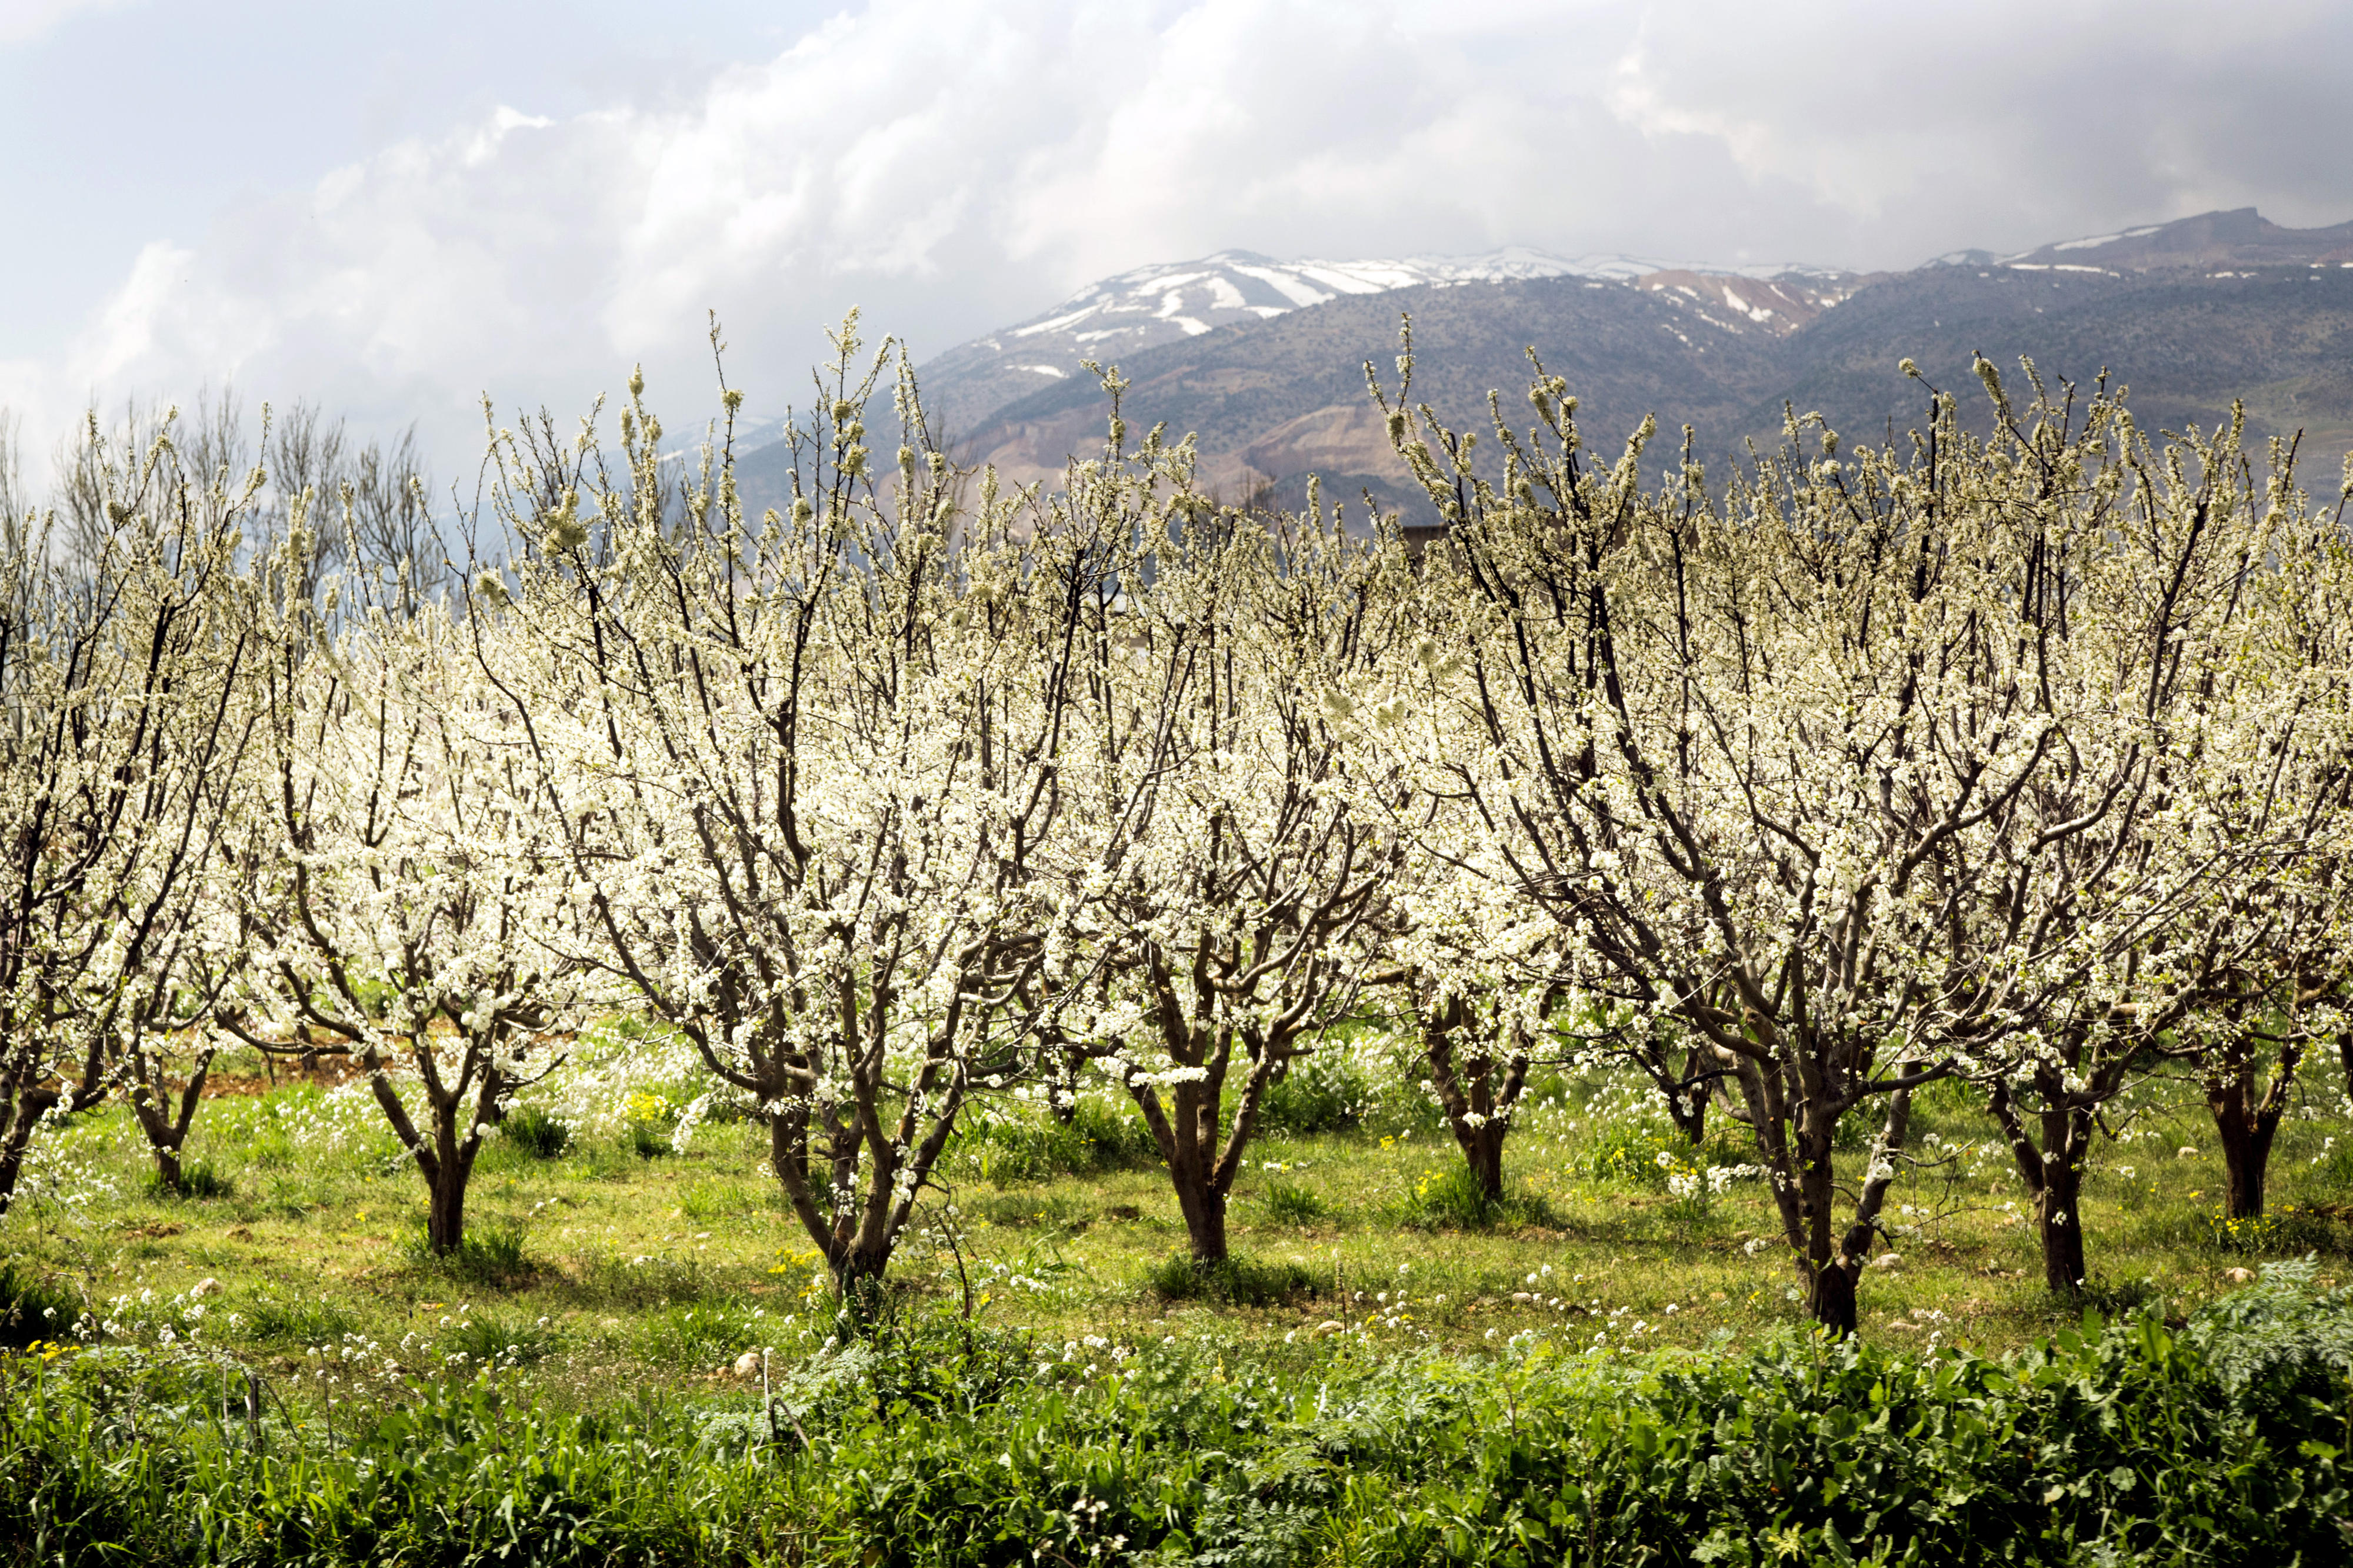 Trees blossoming in the Bekaa plain in Lebanon